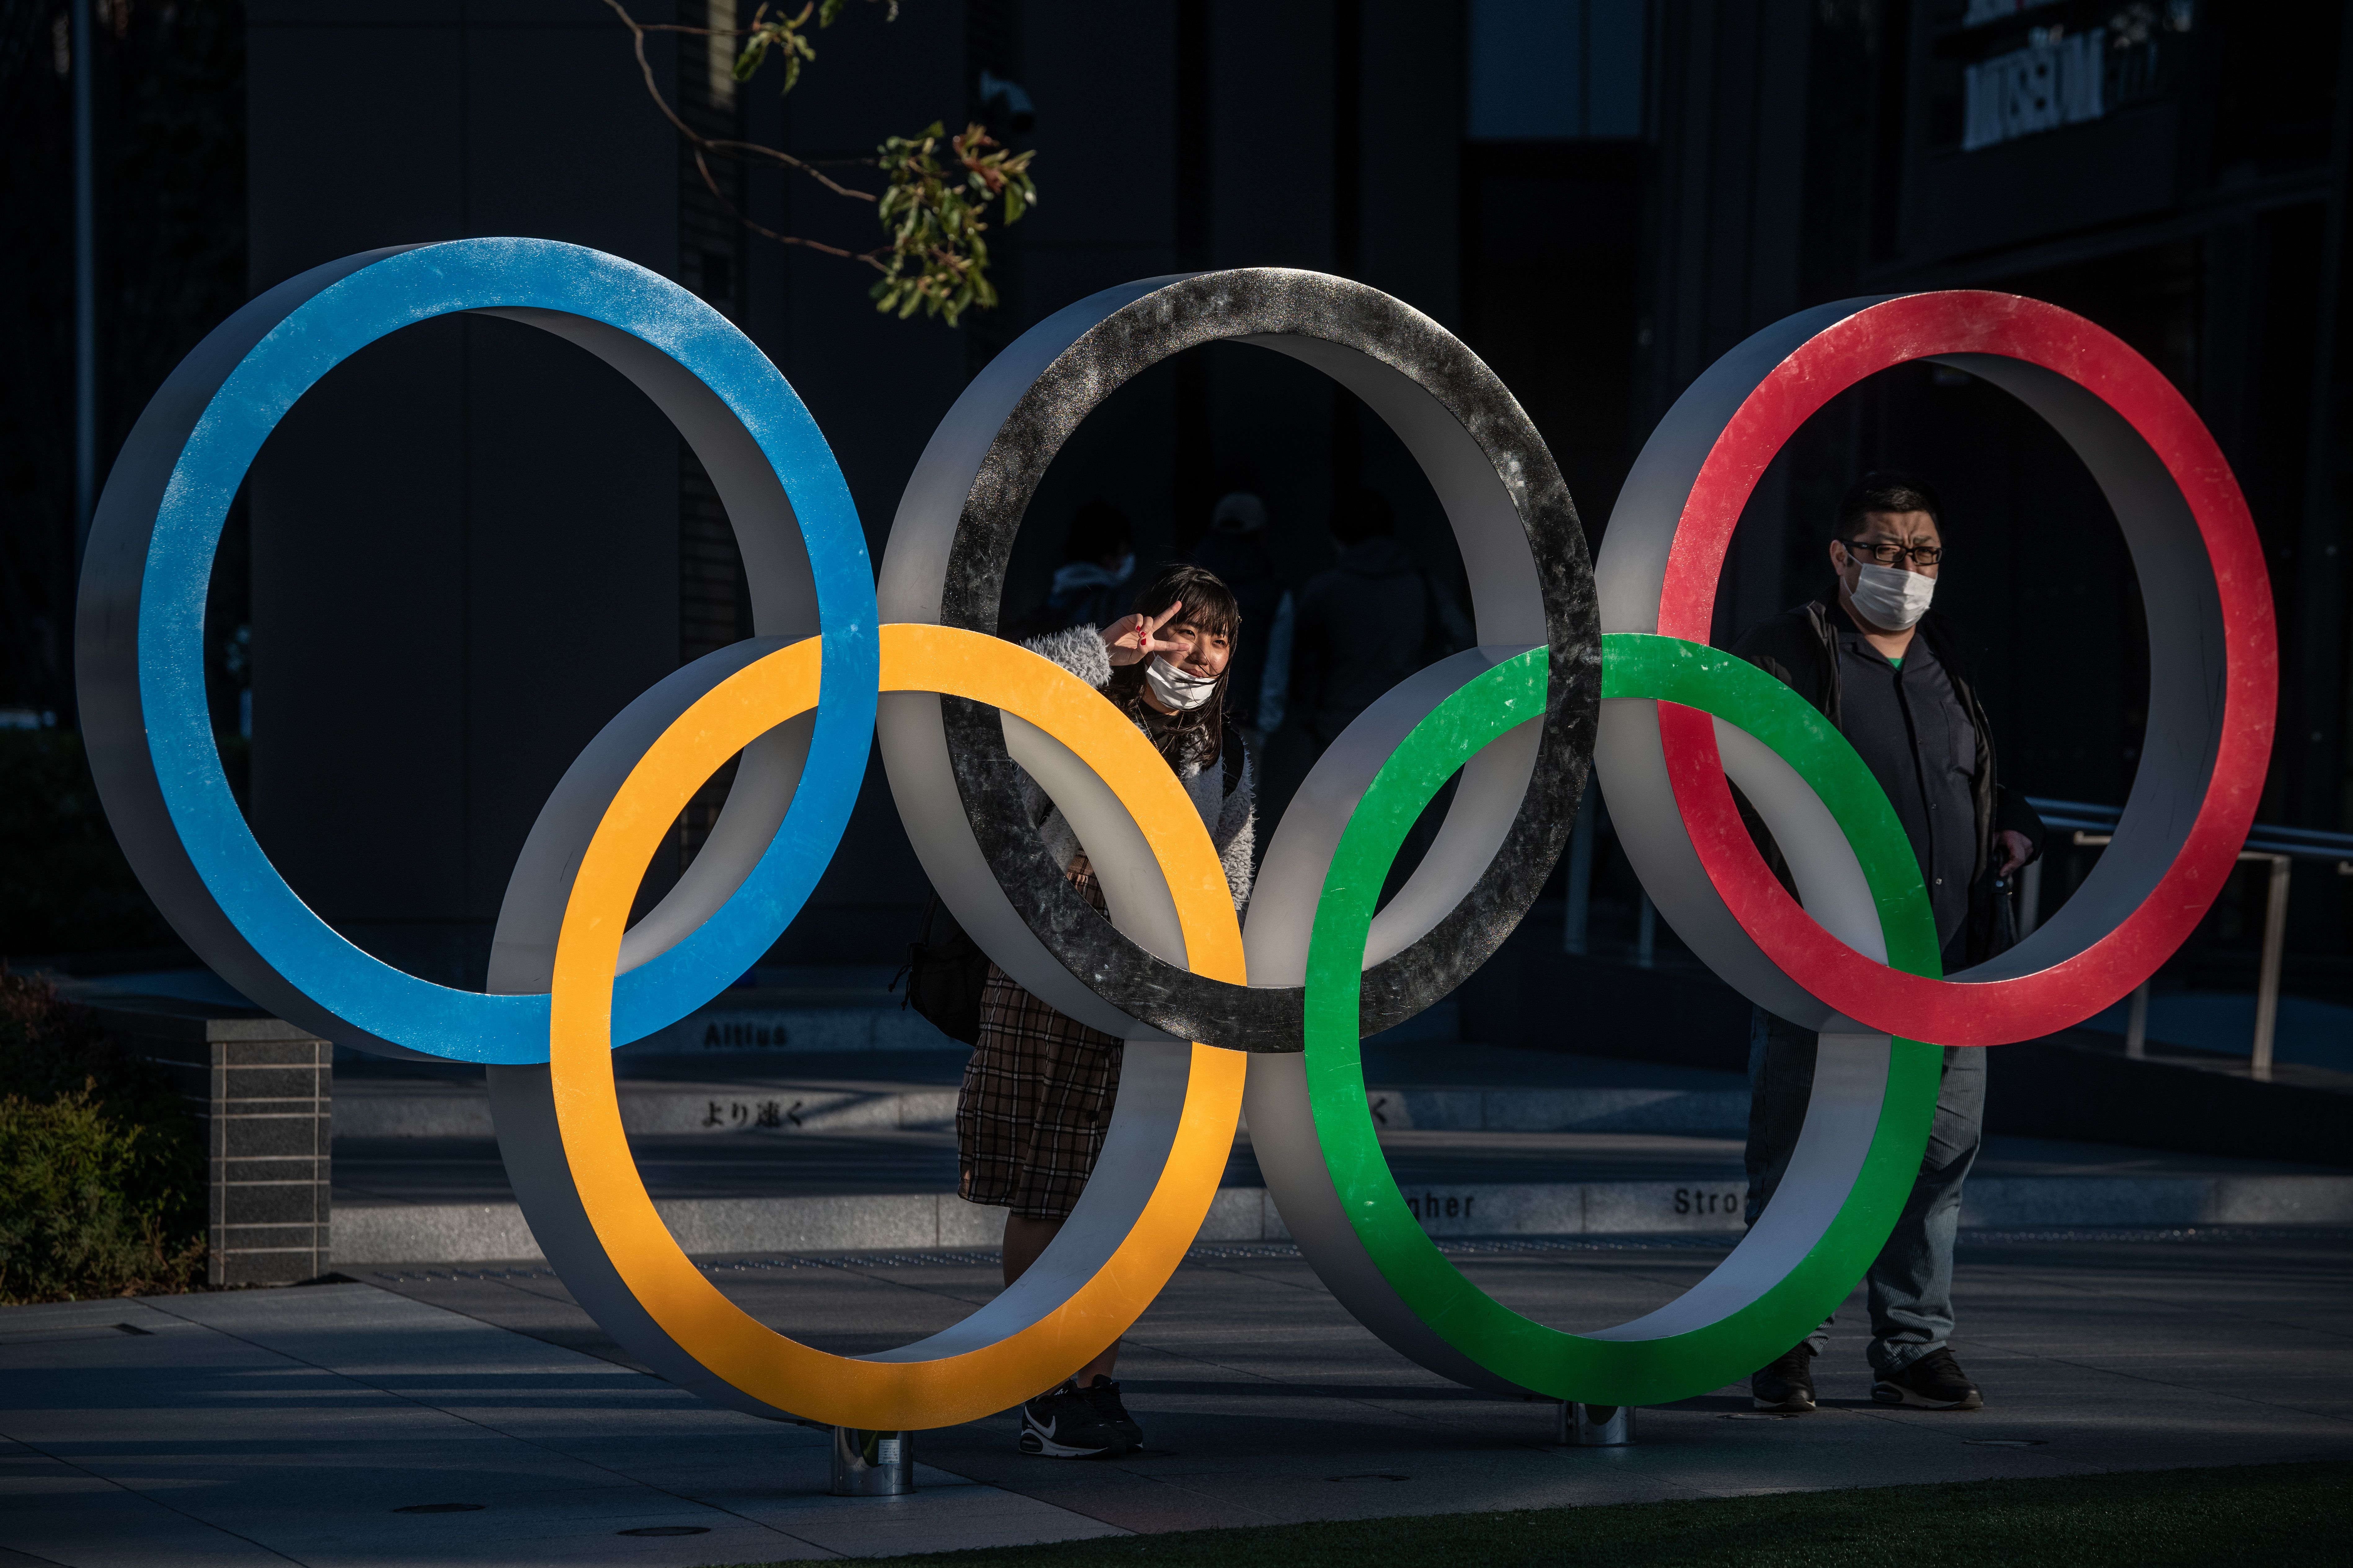 International Olympic Committee's Olympic rings.